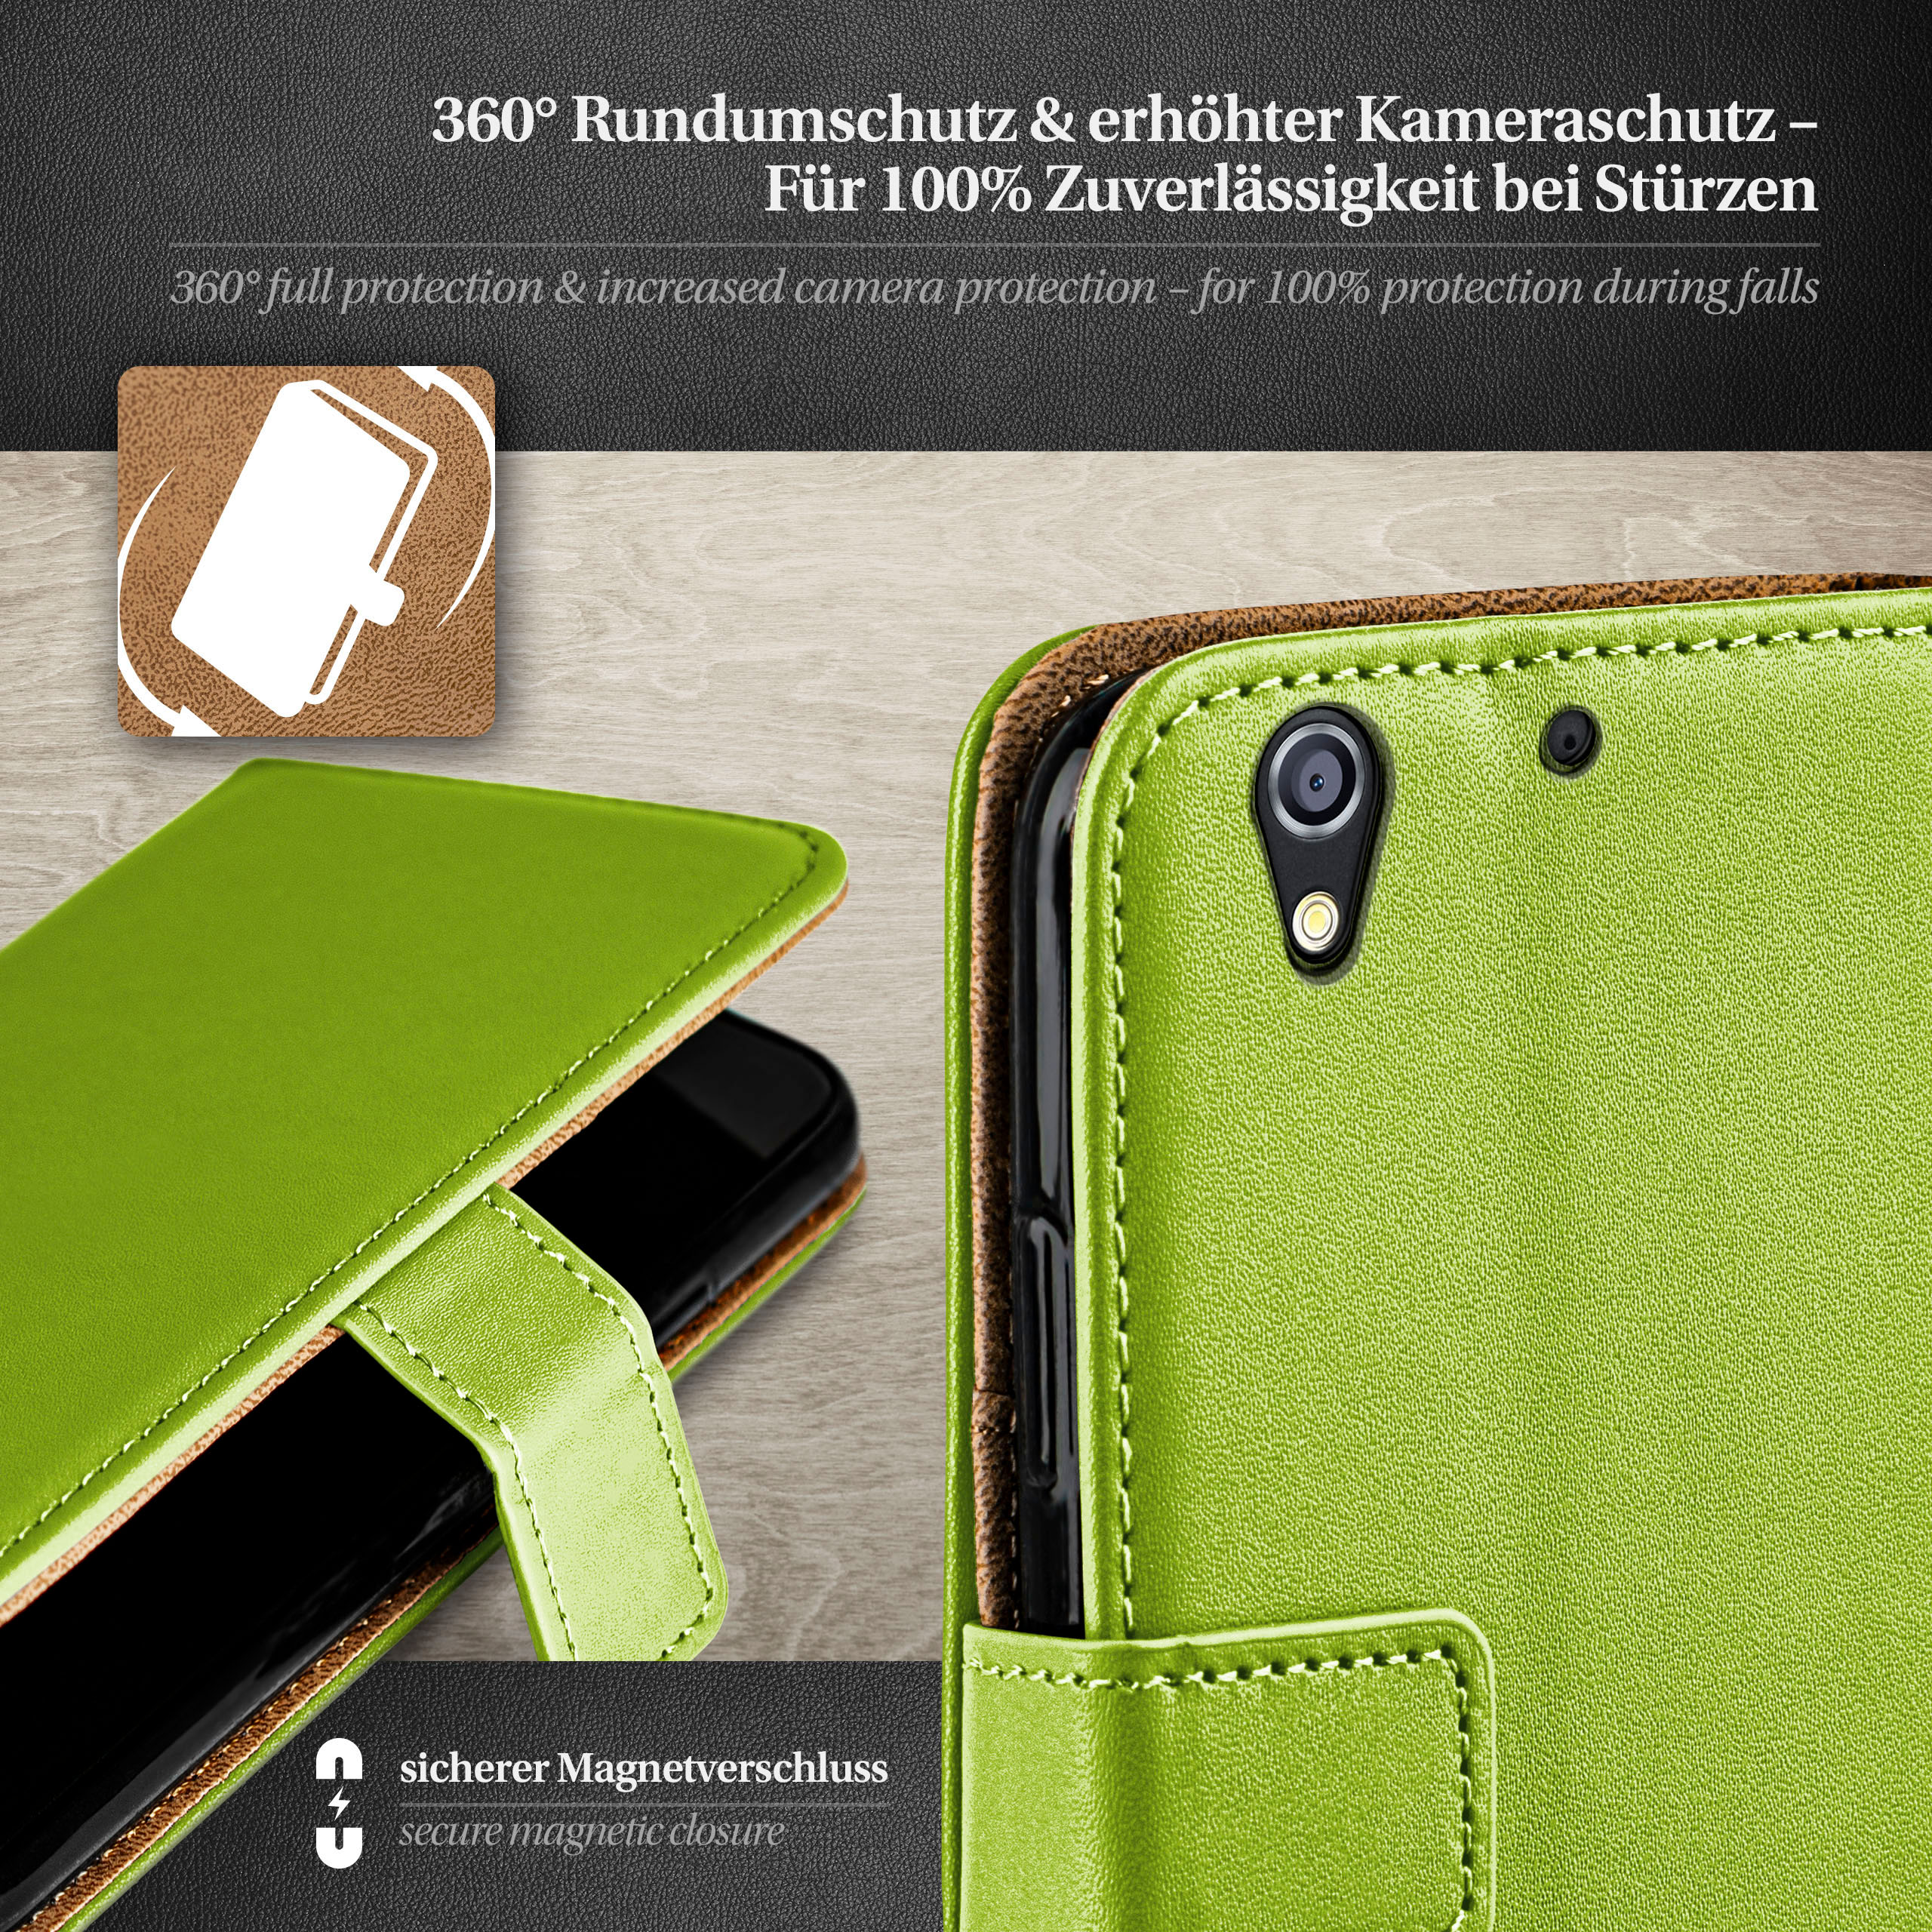 Lime-Green Book MOEX Desire Case, Bookcover, 626G, HTC,